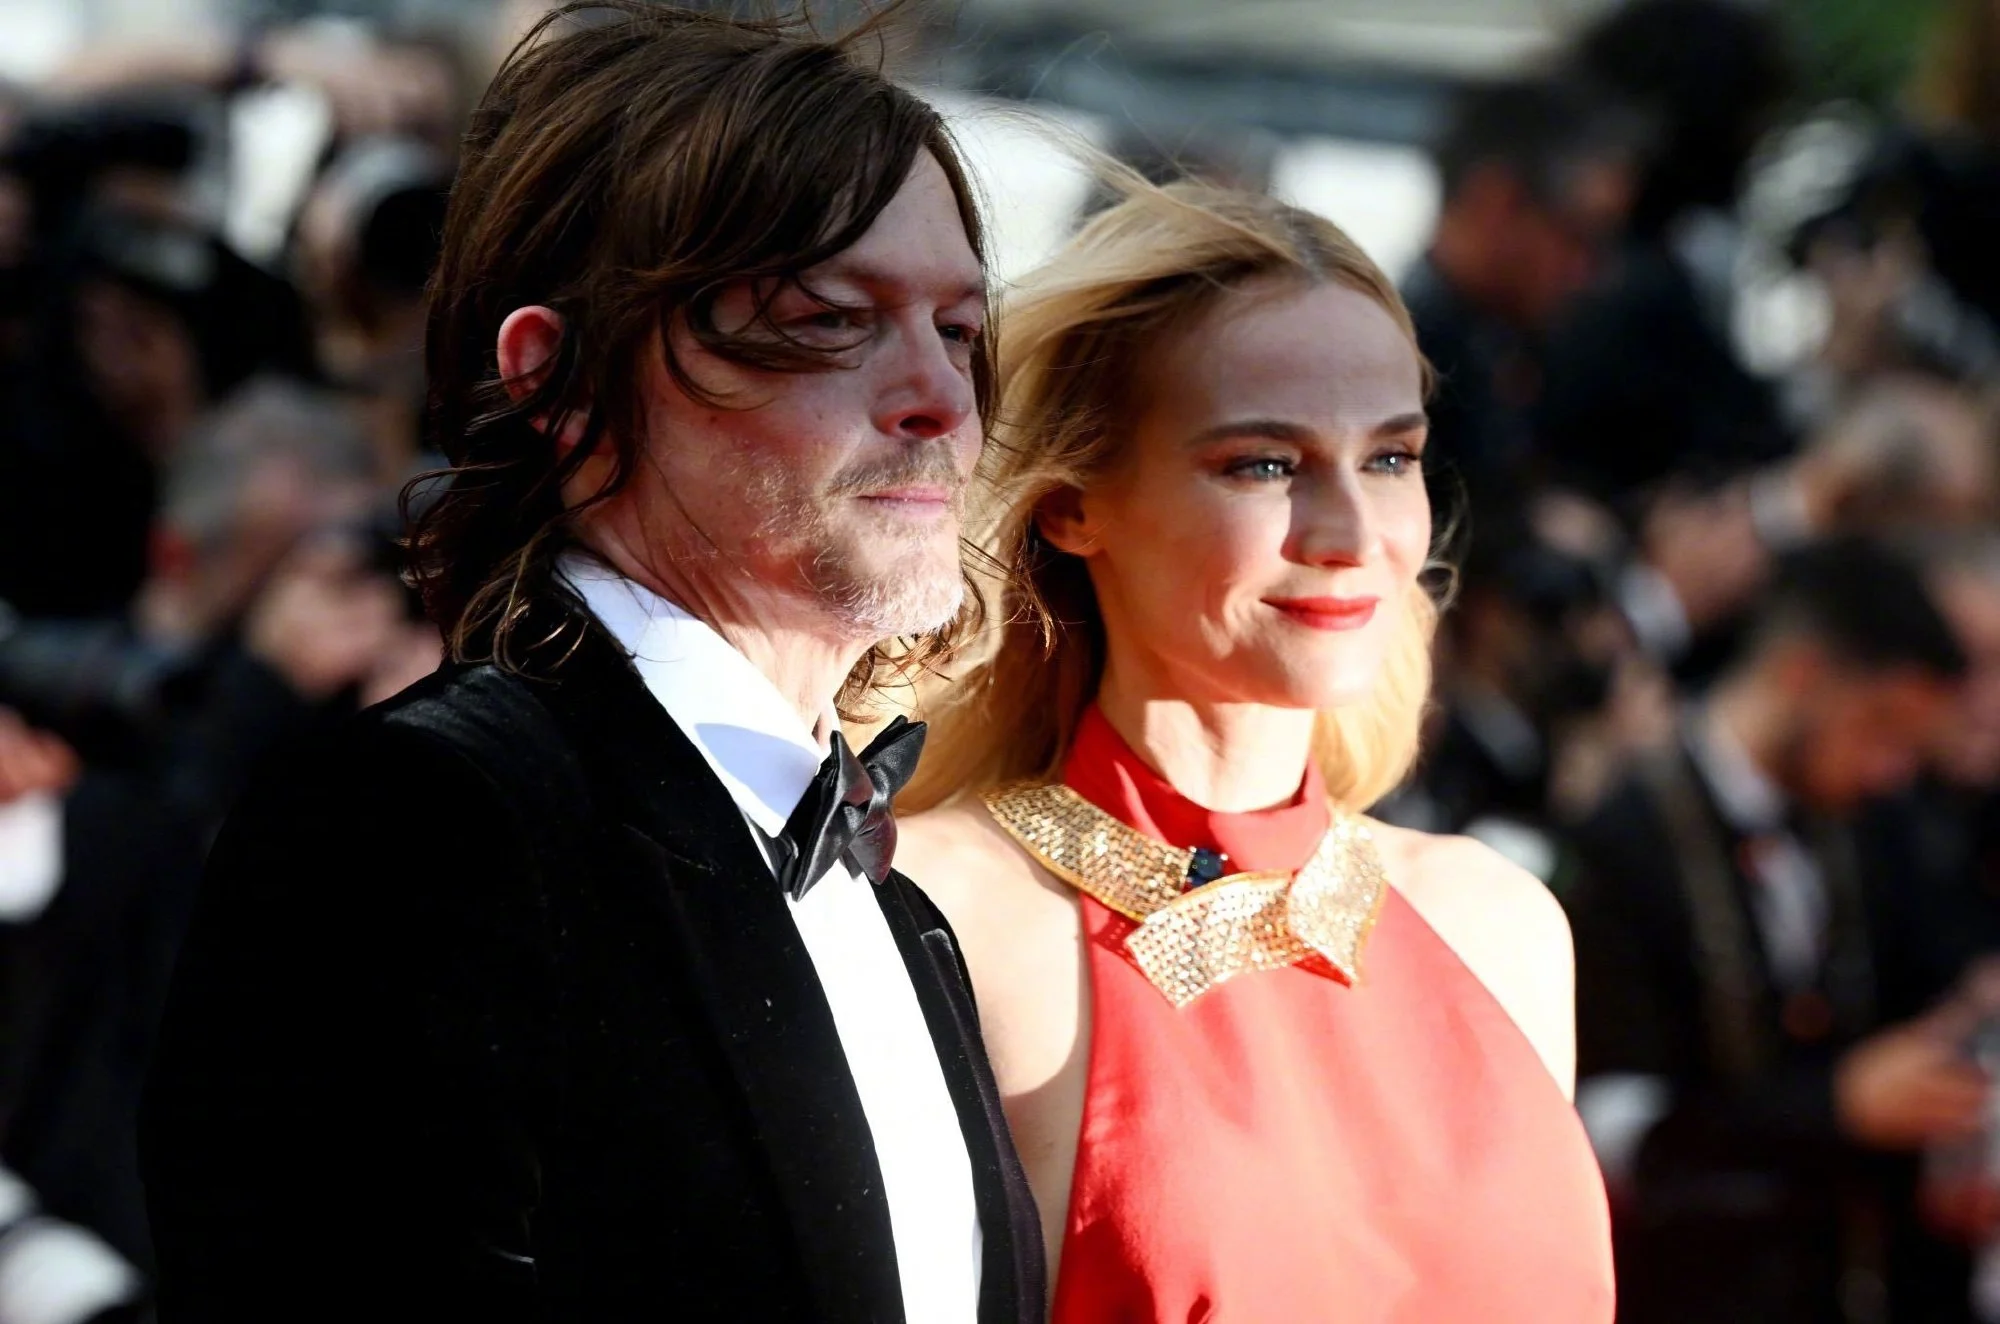 Diane Kruger and Norman Mark Reedus at Cannes Film Festival 75th Anniversary Celebration